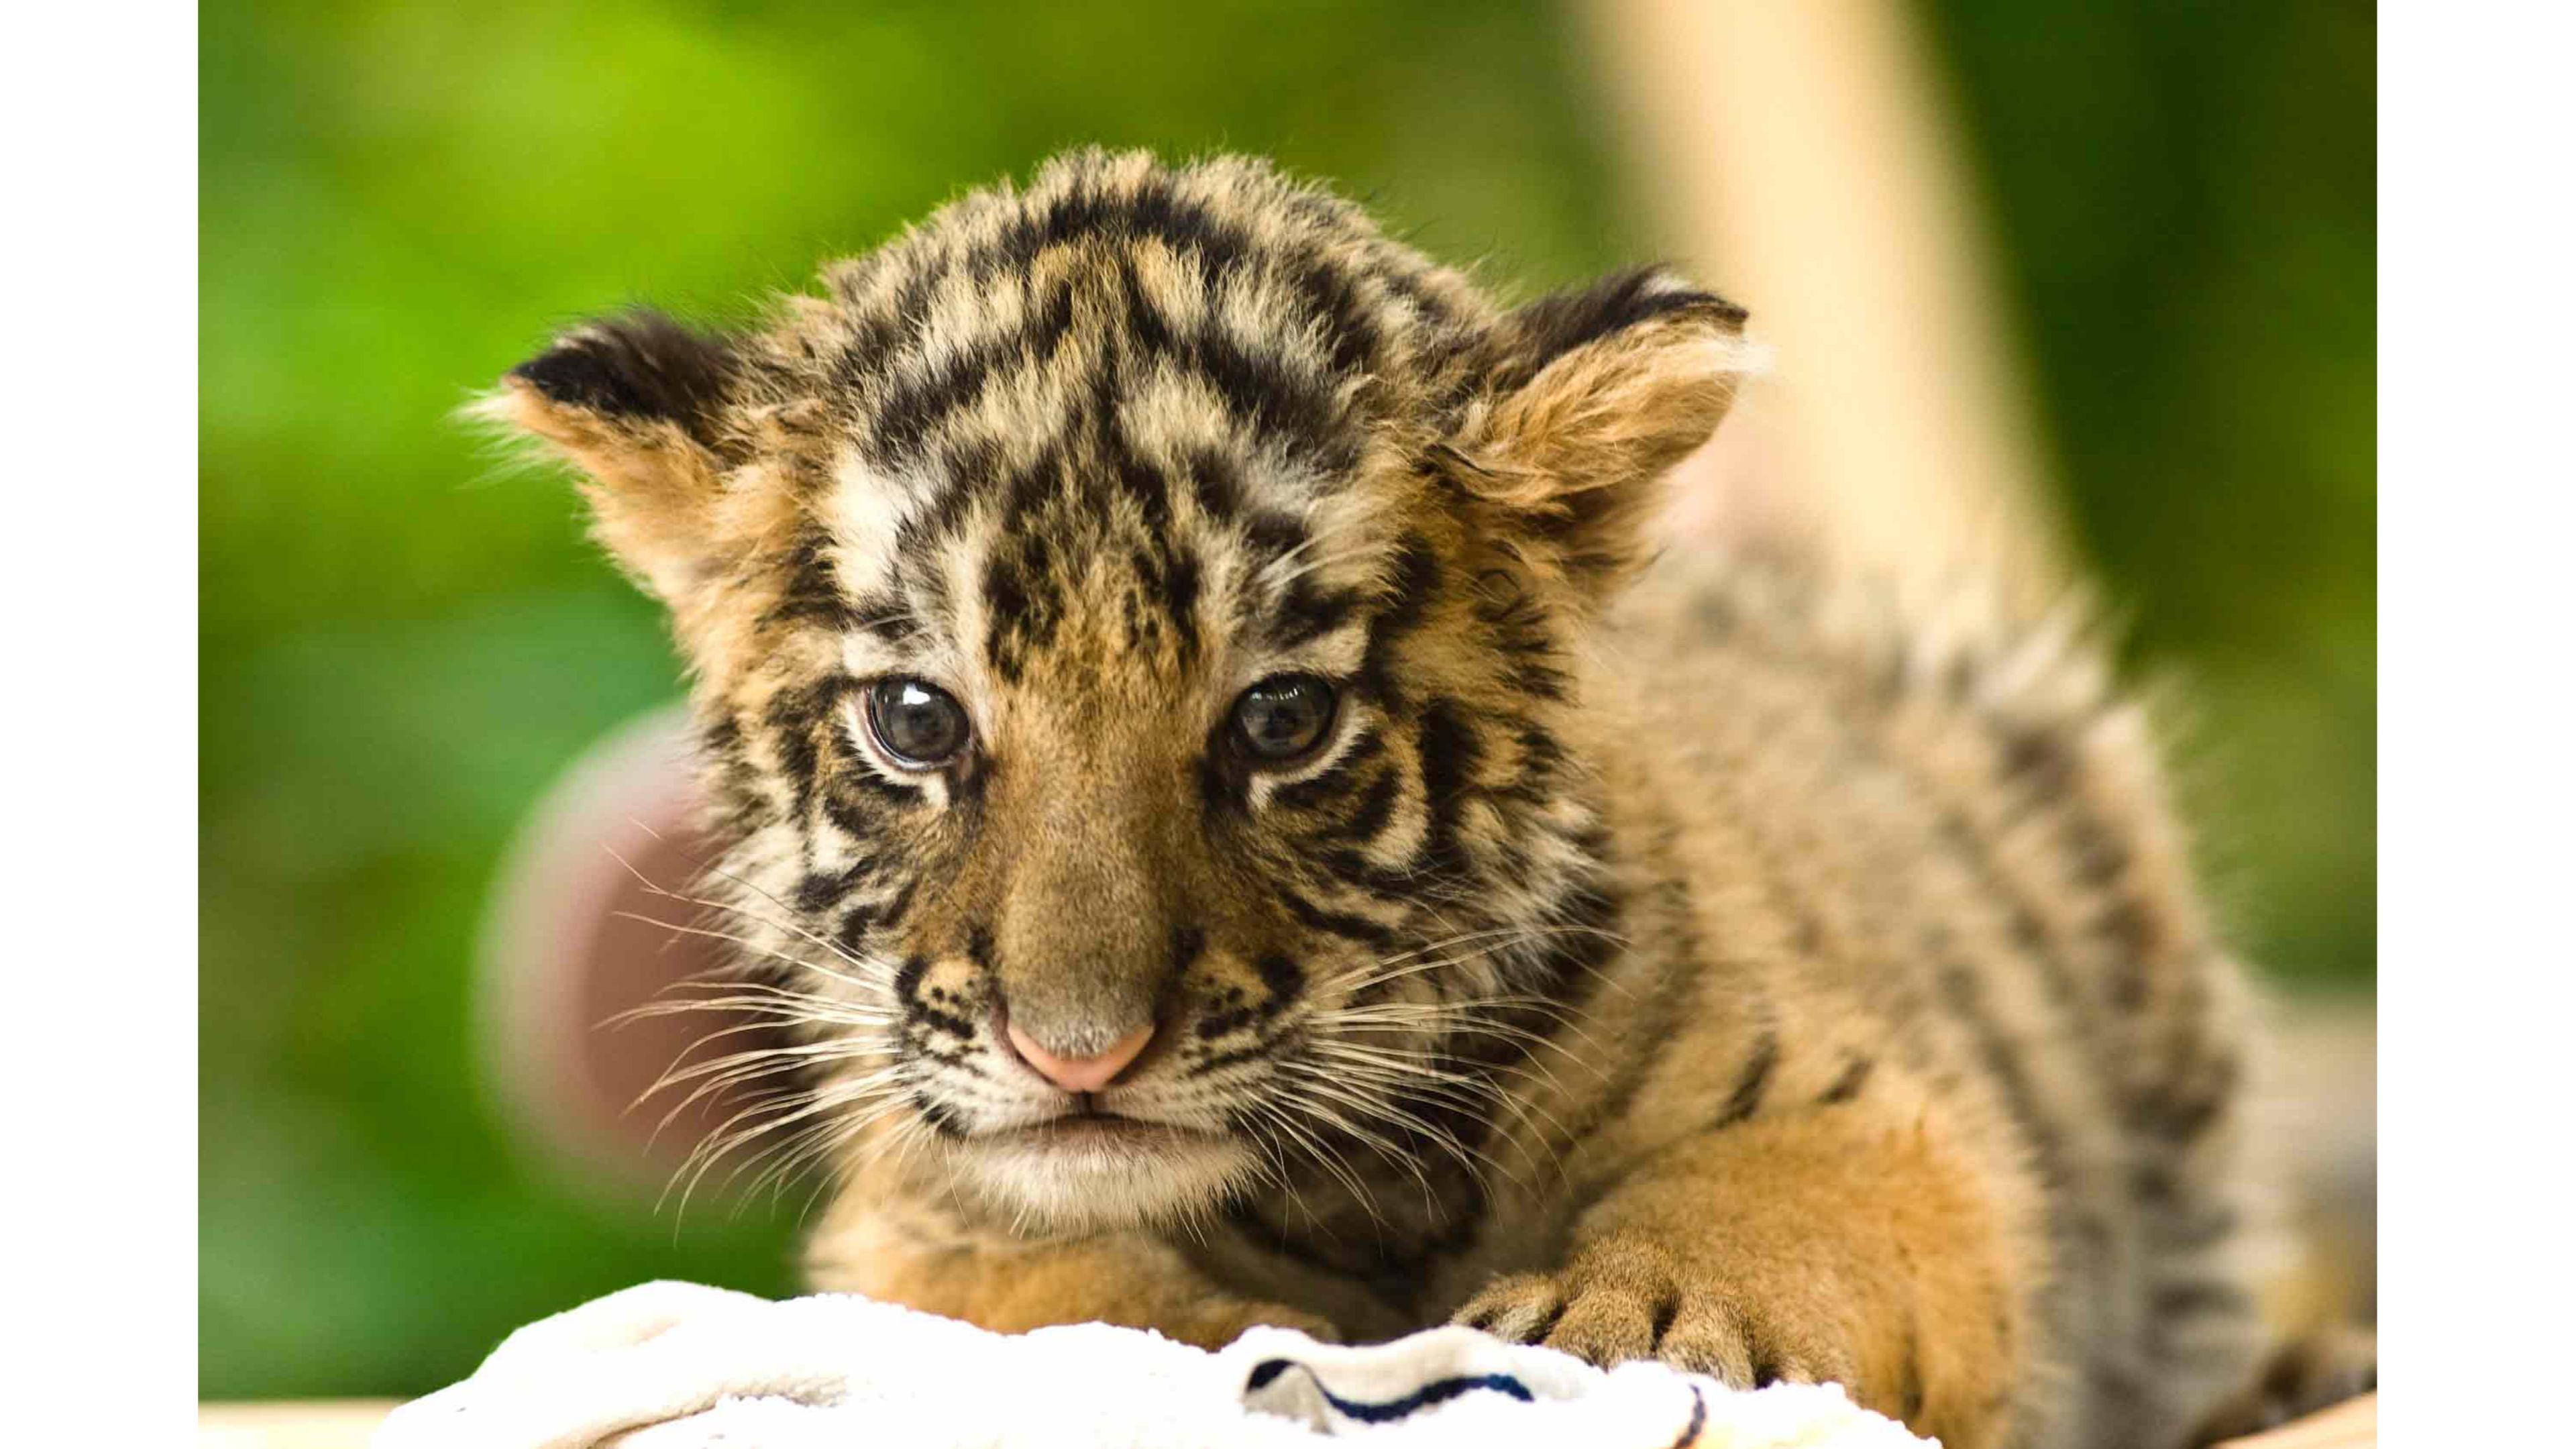 Cute baby tigers wallpapers.